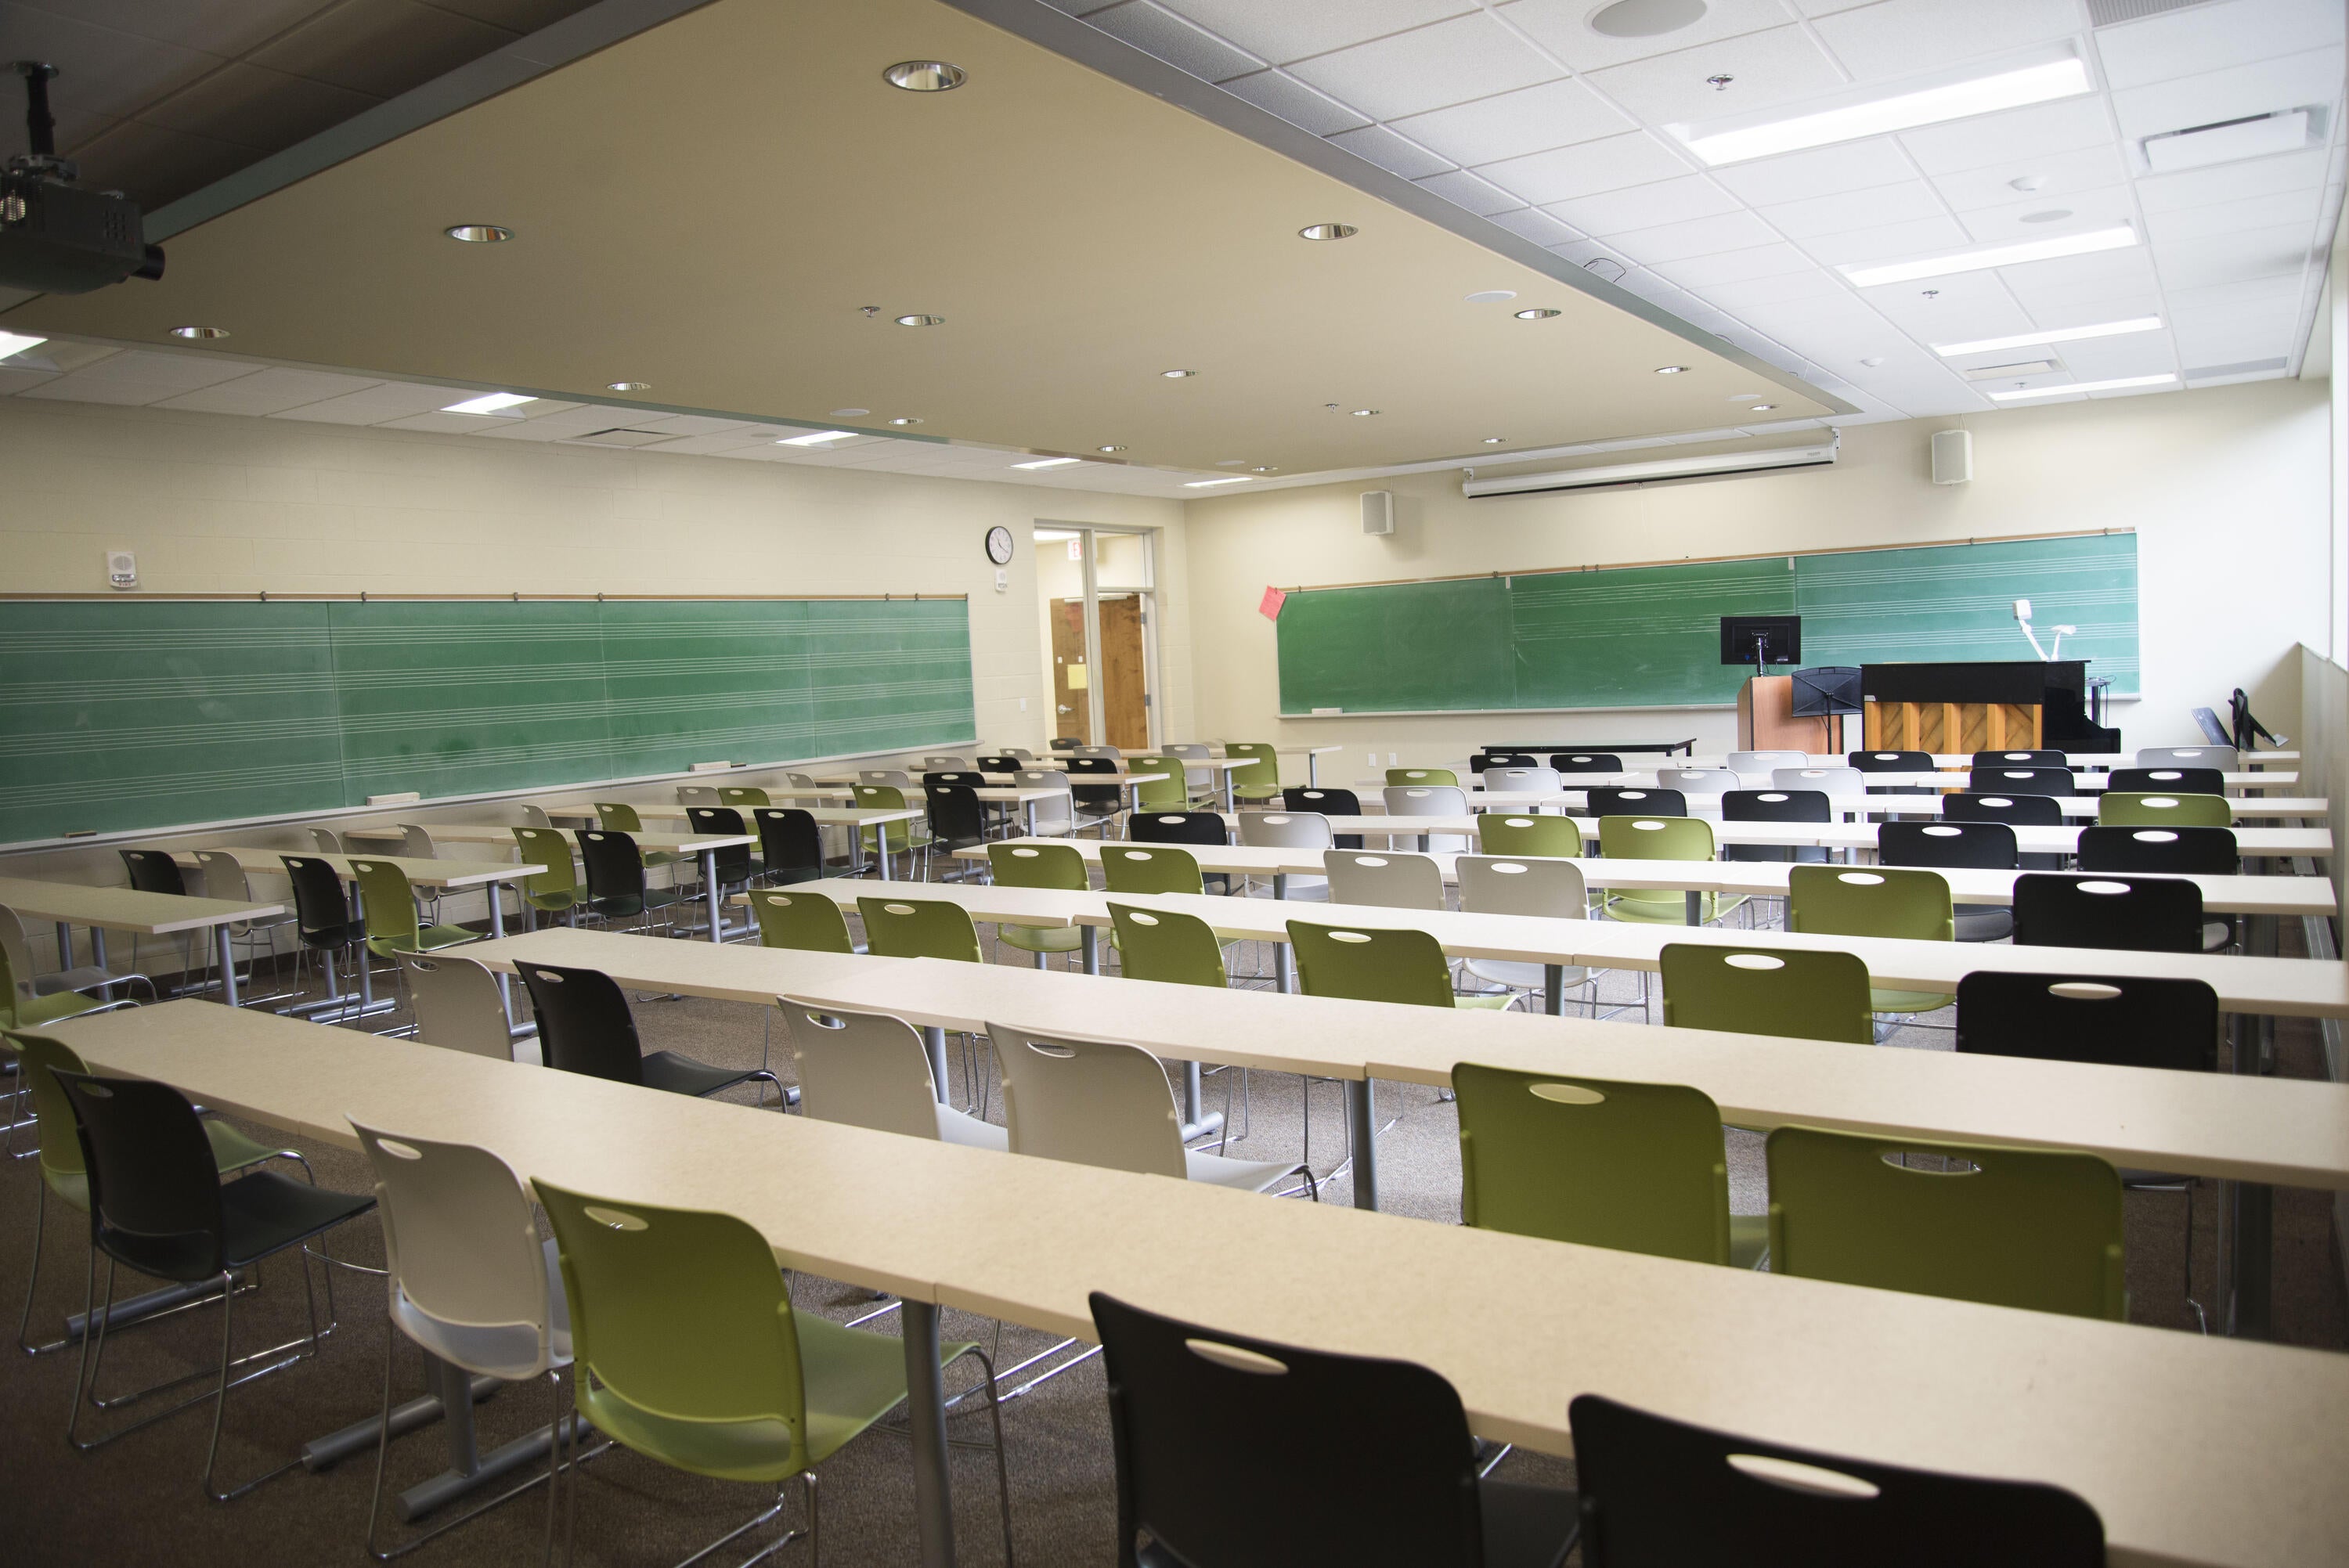 Classroom with long tables, chairs, chalkboards, a projector, and an upright piano